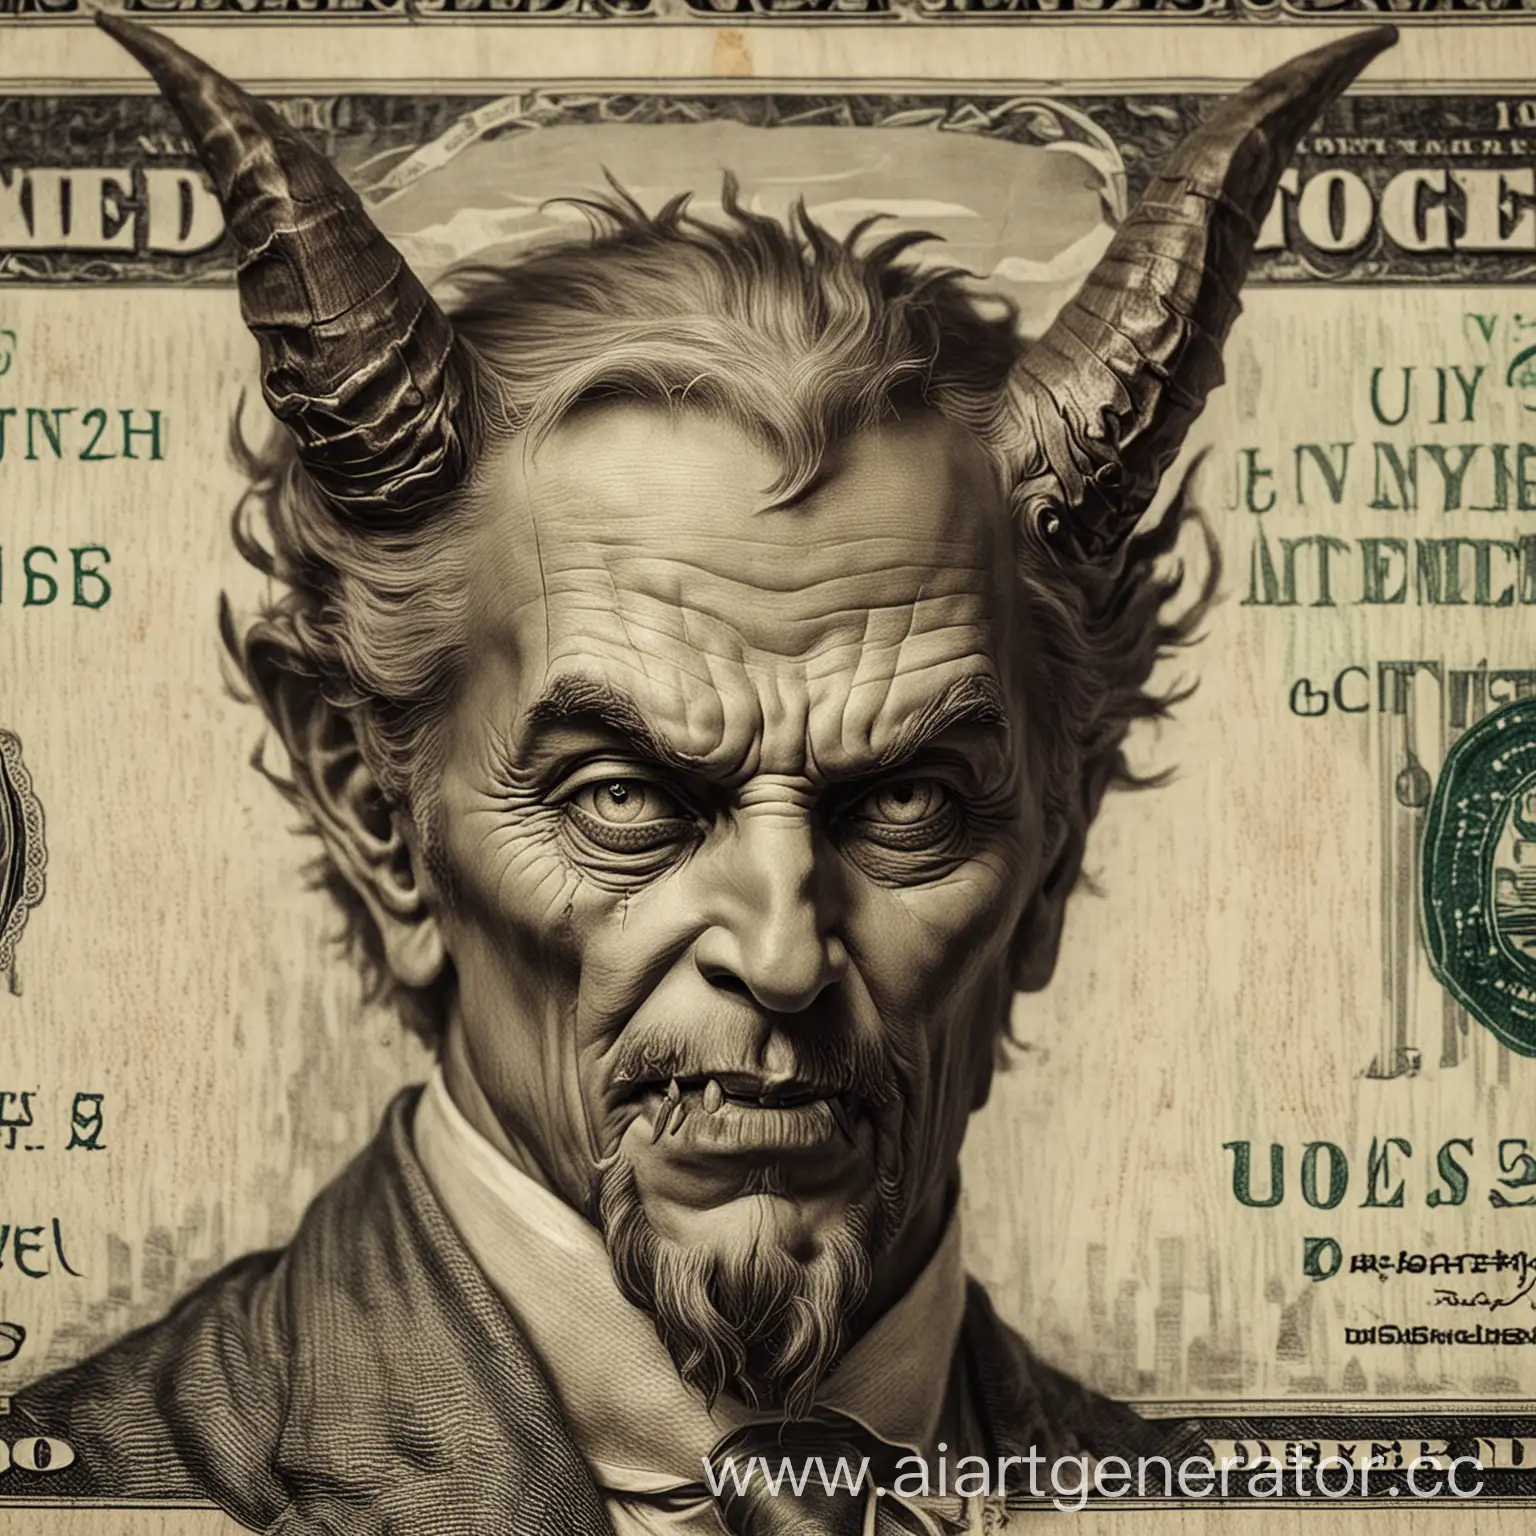 Sinister-Devil-Figure-on-American-Currency